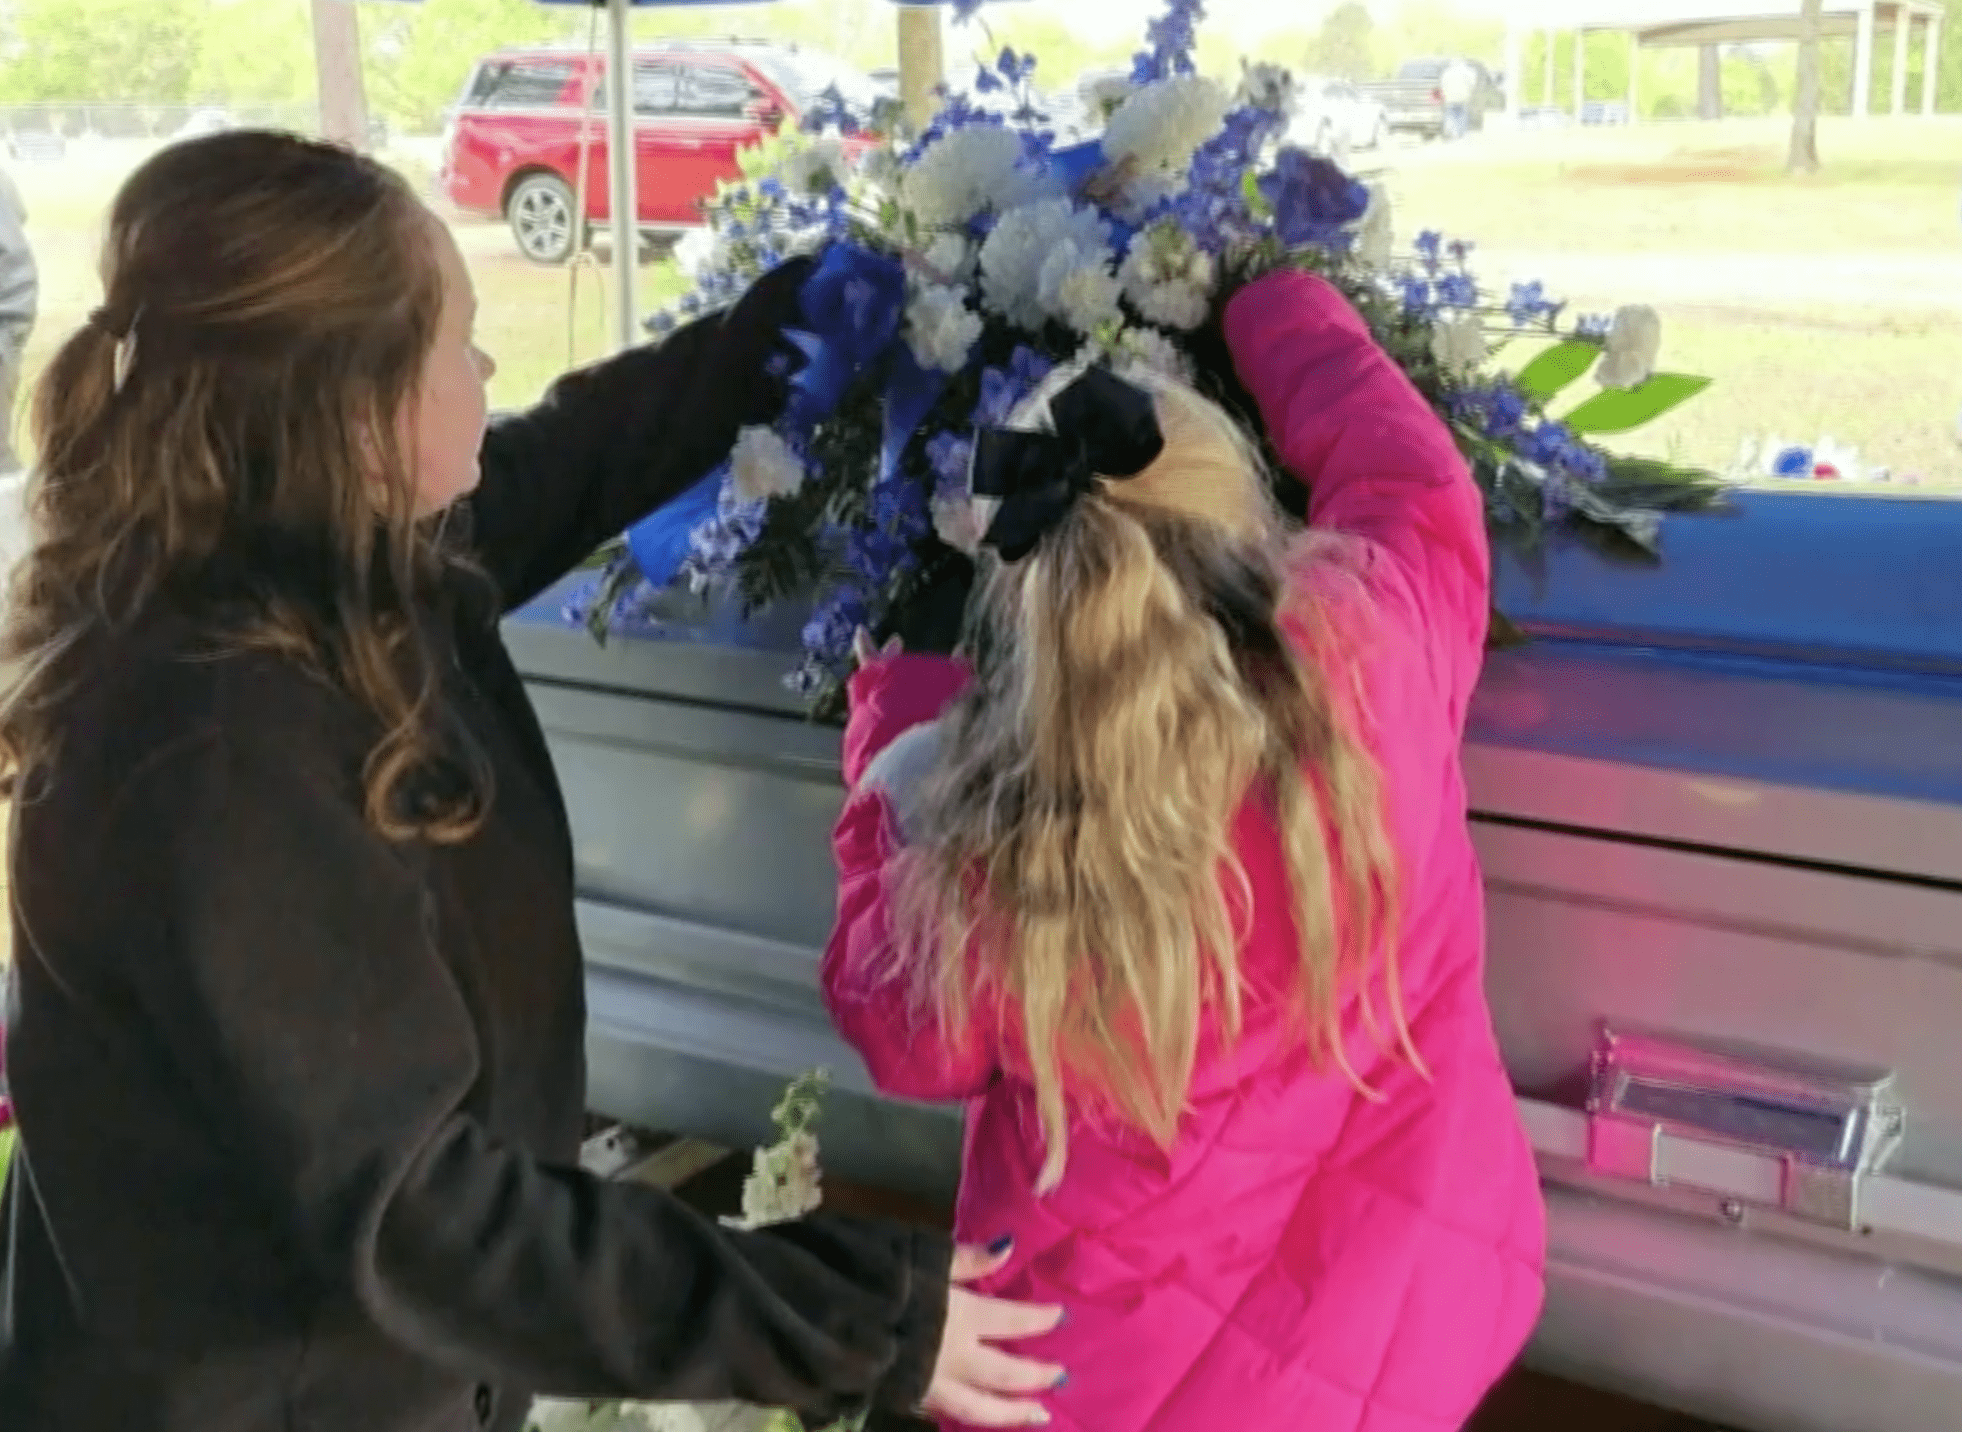 Family bids farewell to a loved one at the funeral. | Source: youtube.com/CBS Sunday Morning